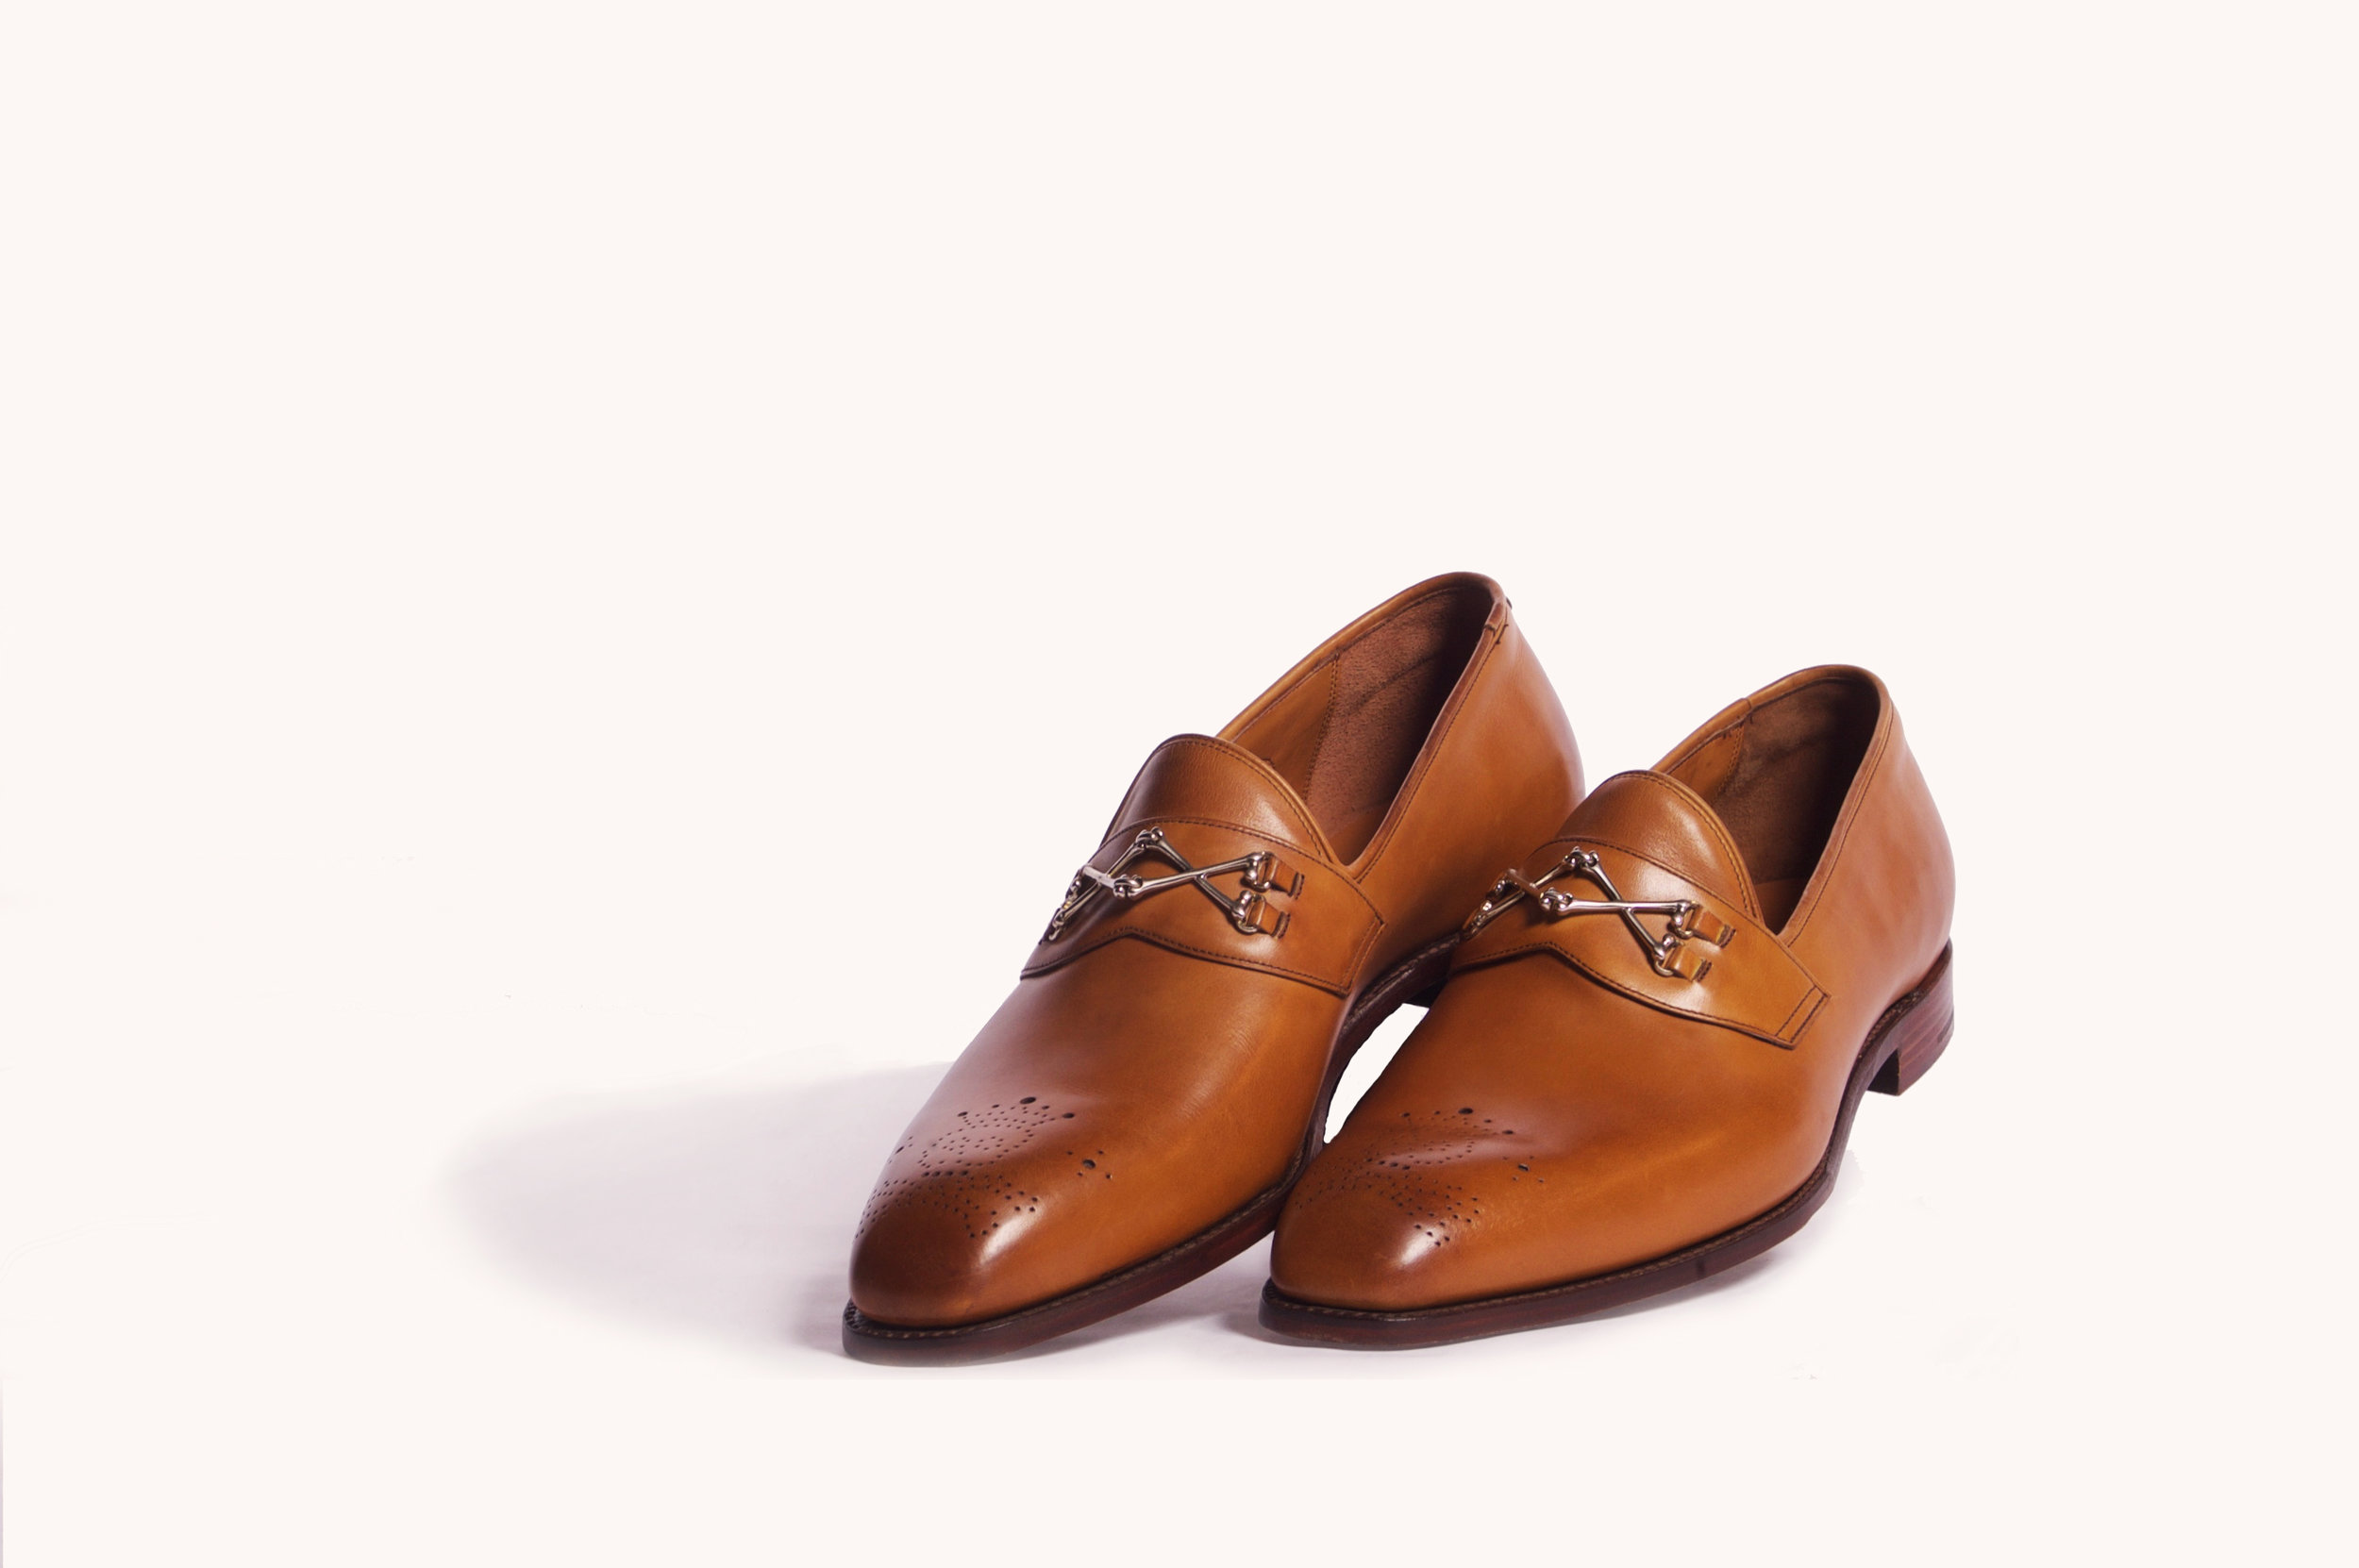 cut loafer shoes